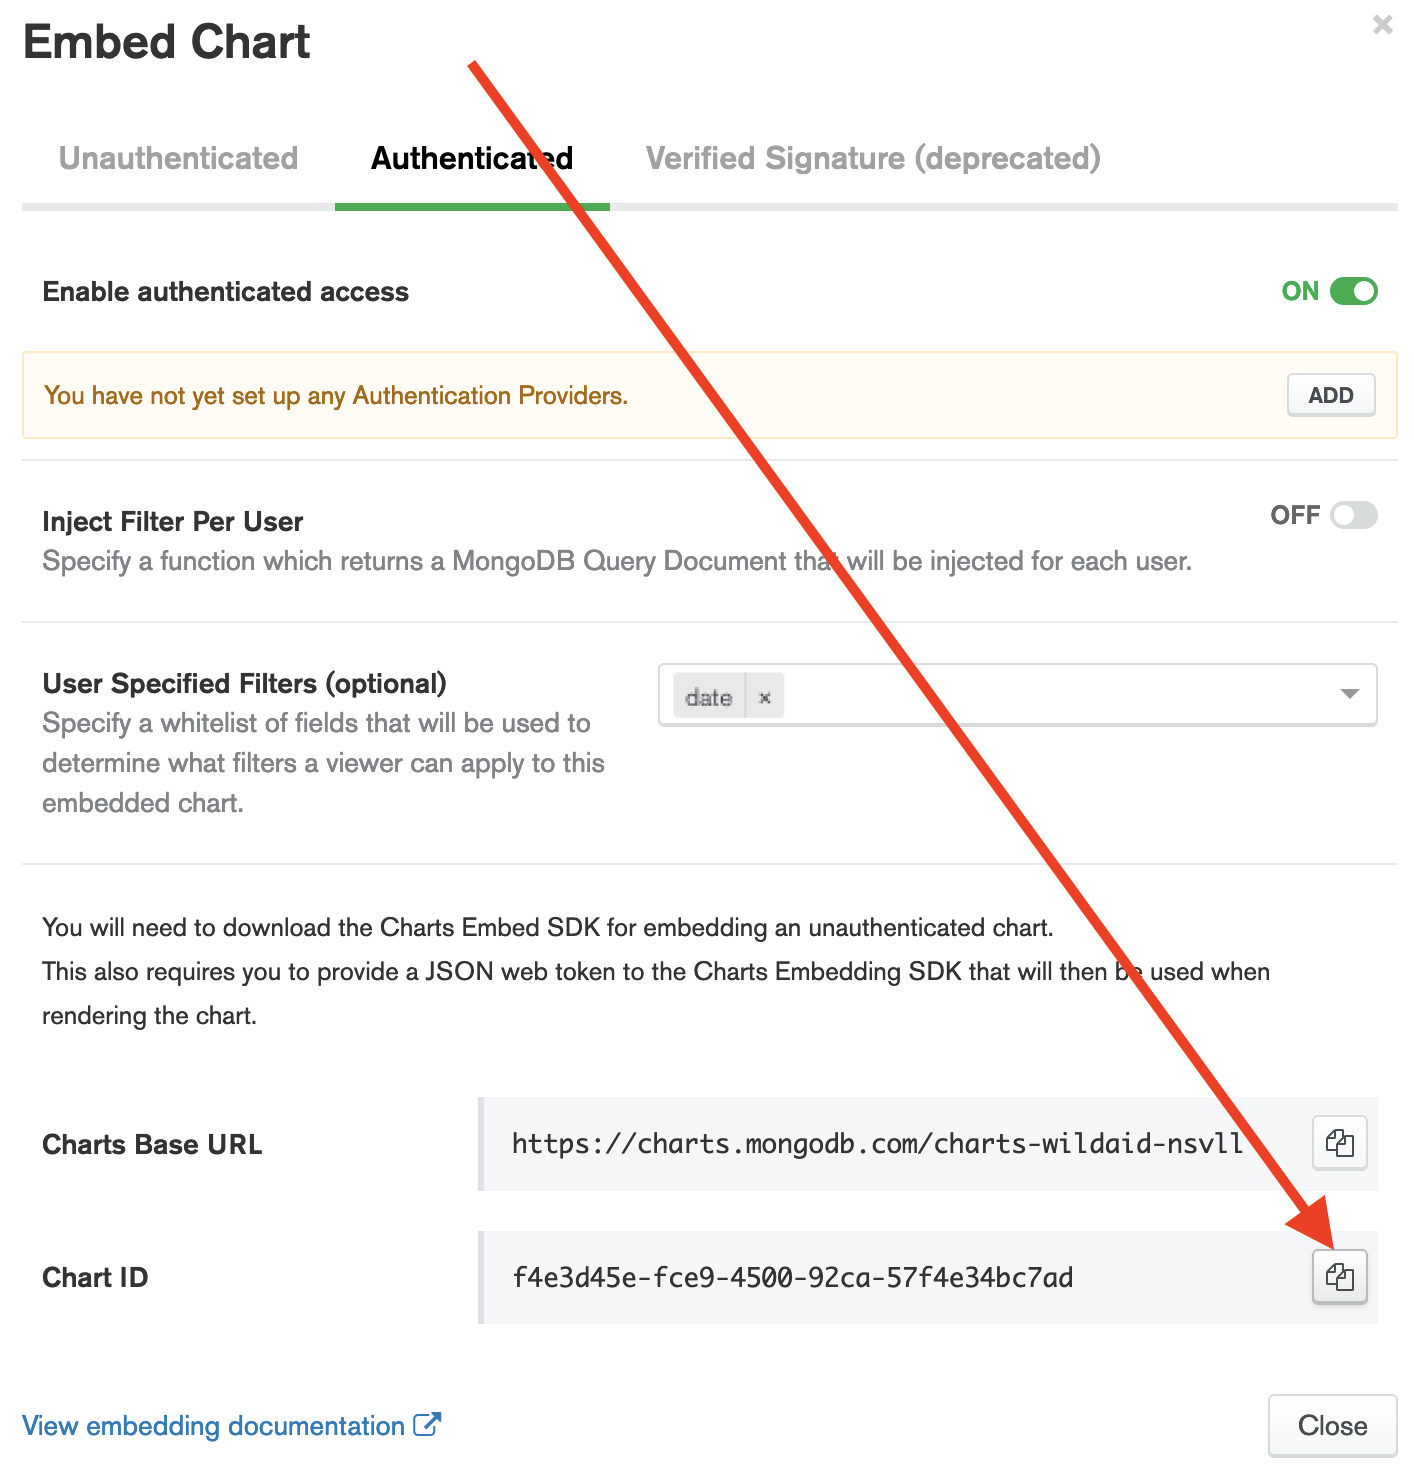 How to get the Chart ID of an Embed Chart